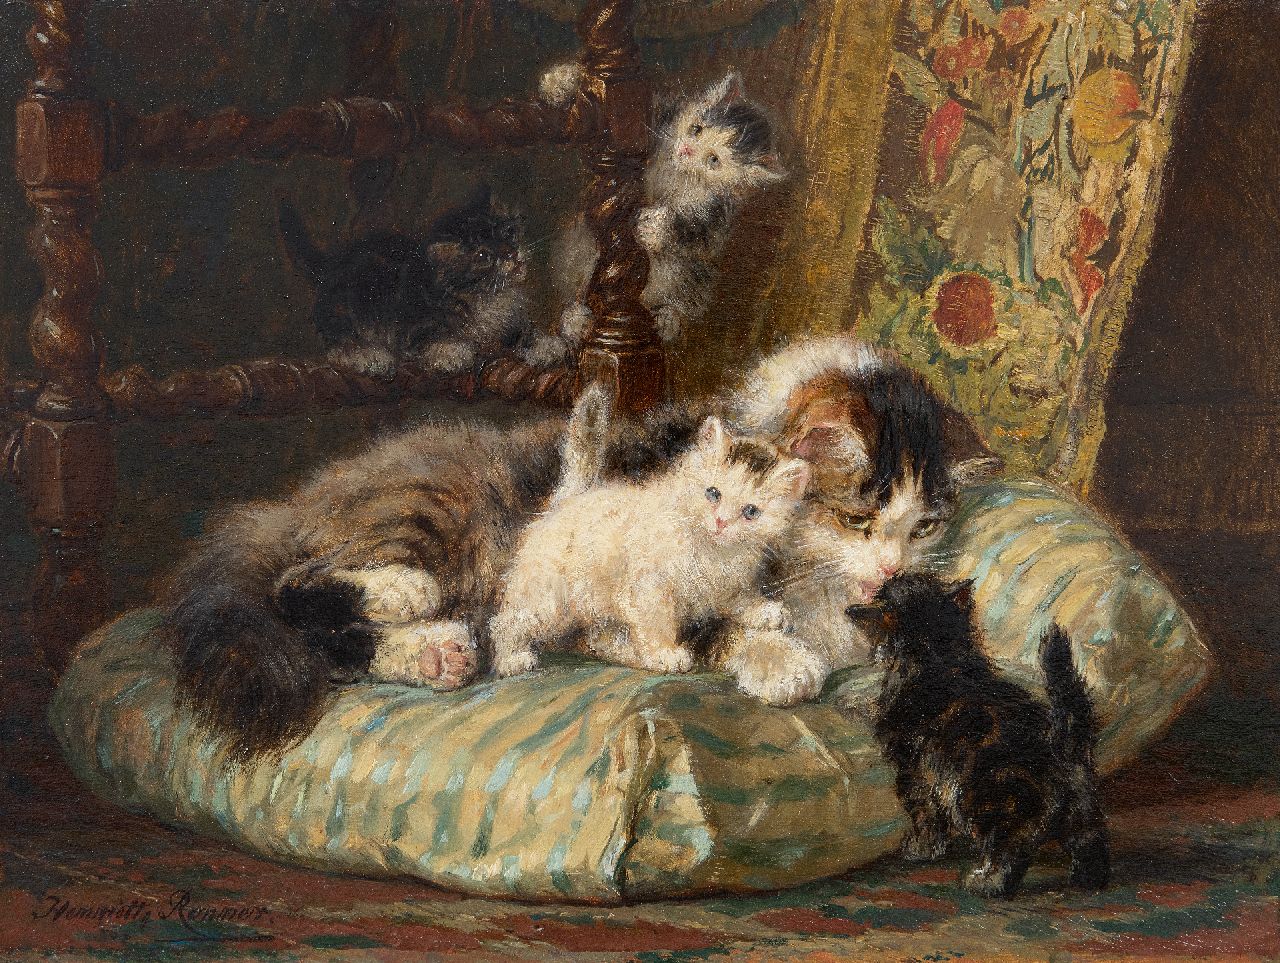 Ronner-Knip H.  | Henriette Ronner-Knip | Paintings offered for sale | Mother cat with four playing kittens, oil on panel 24.5 x 32.6 cm, signed l.l.